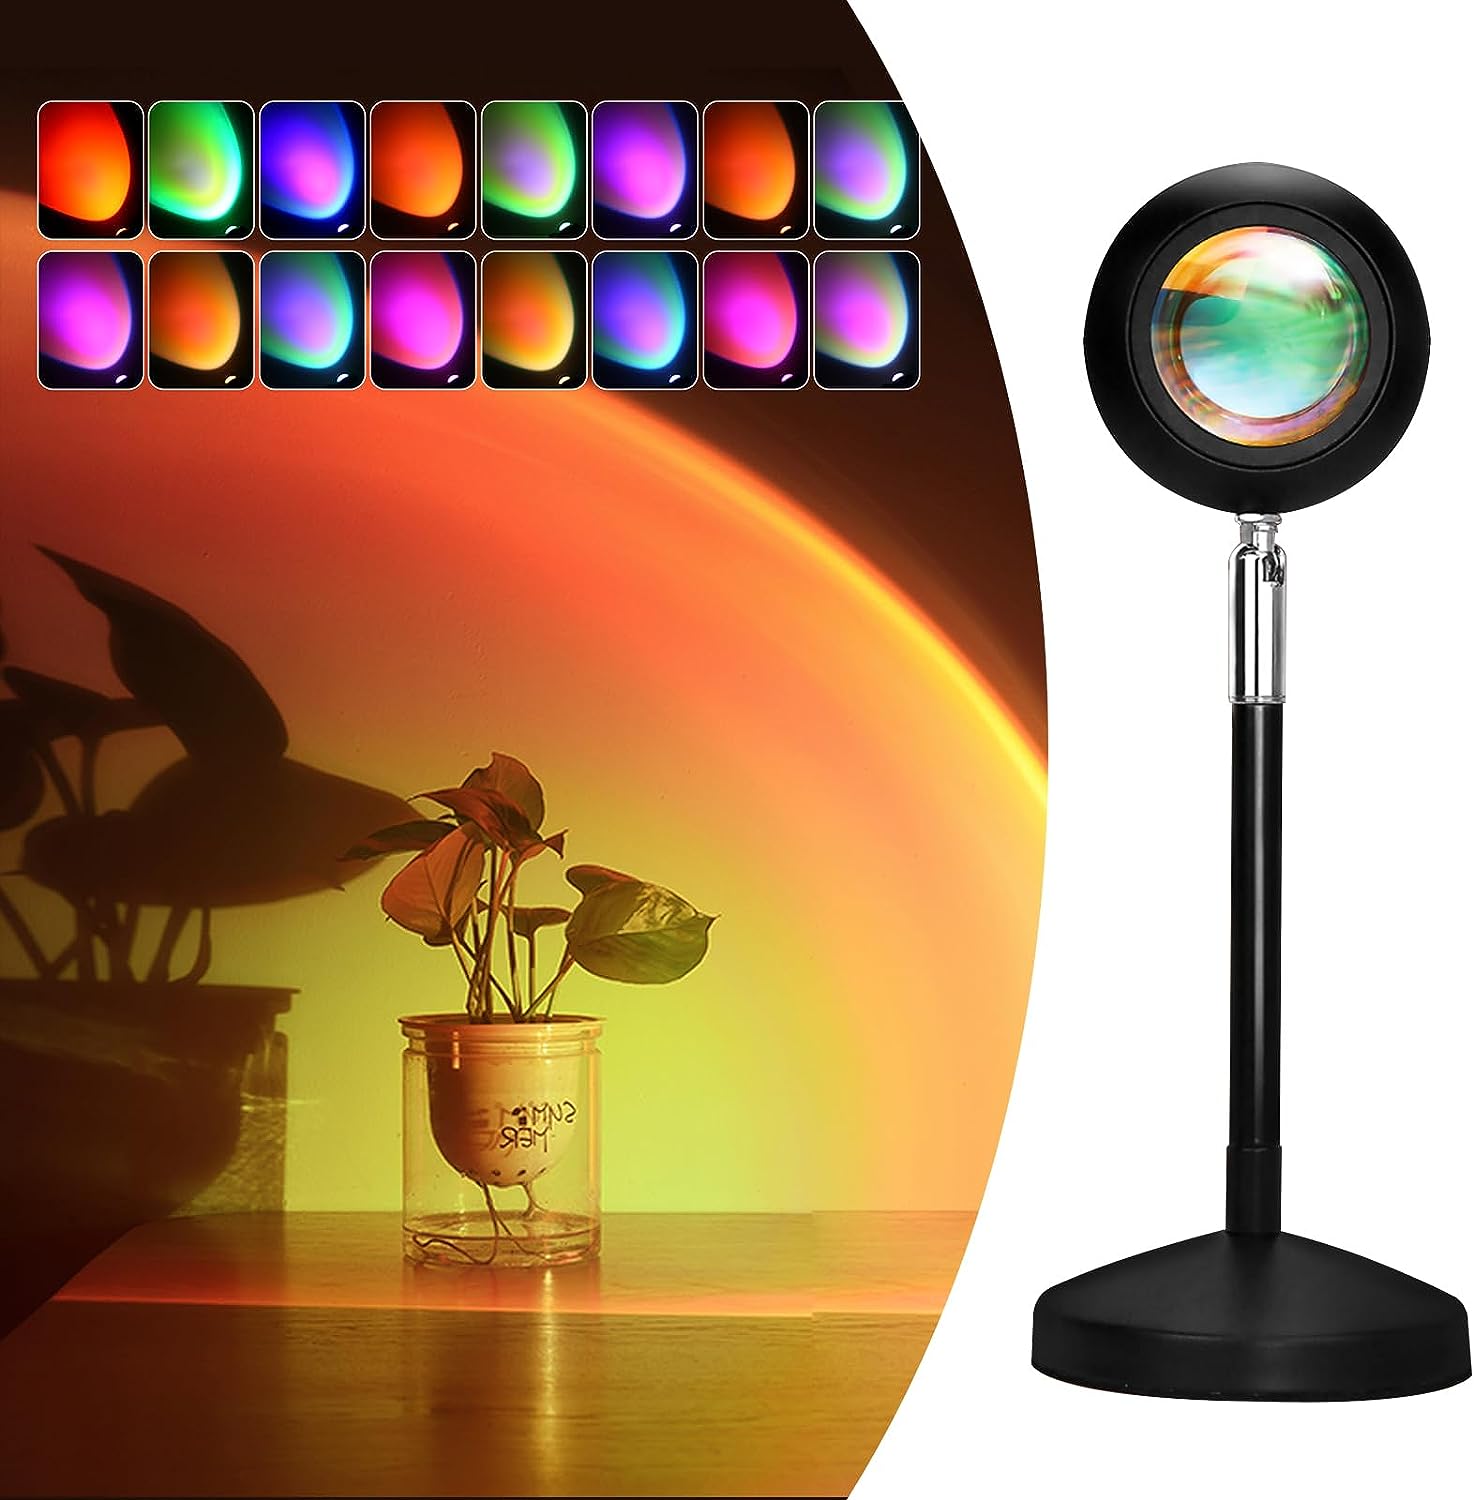 Exnemav Sunset Lamp Night Light - 16 Colors  4 Modes Sunset Projection Lamp with Remote, Color Changing Rainbow Sunlight Lamp, Romantic Visual Led Light Projector for Photography Room Decor